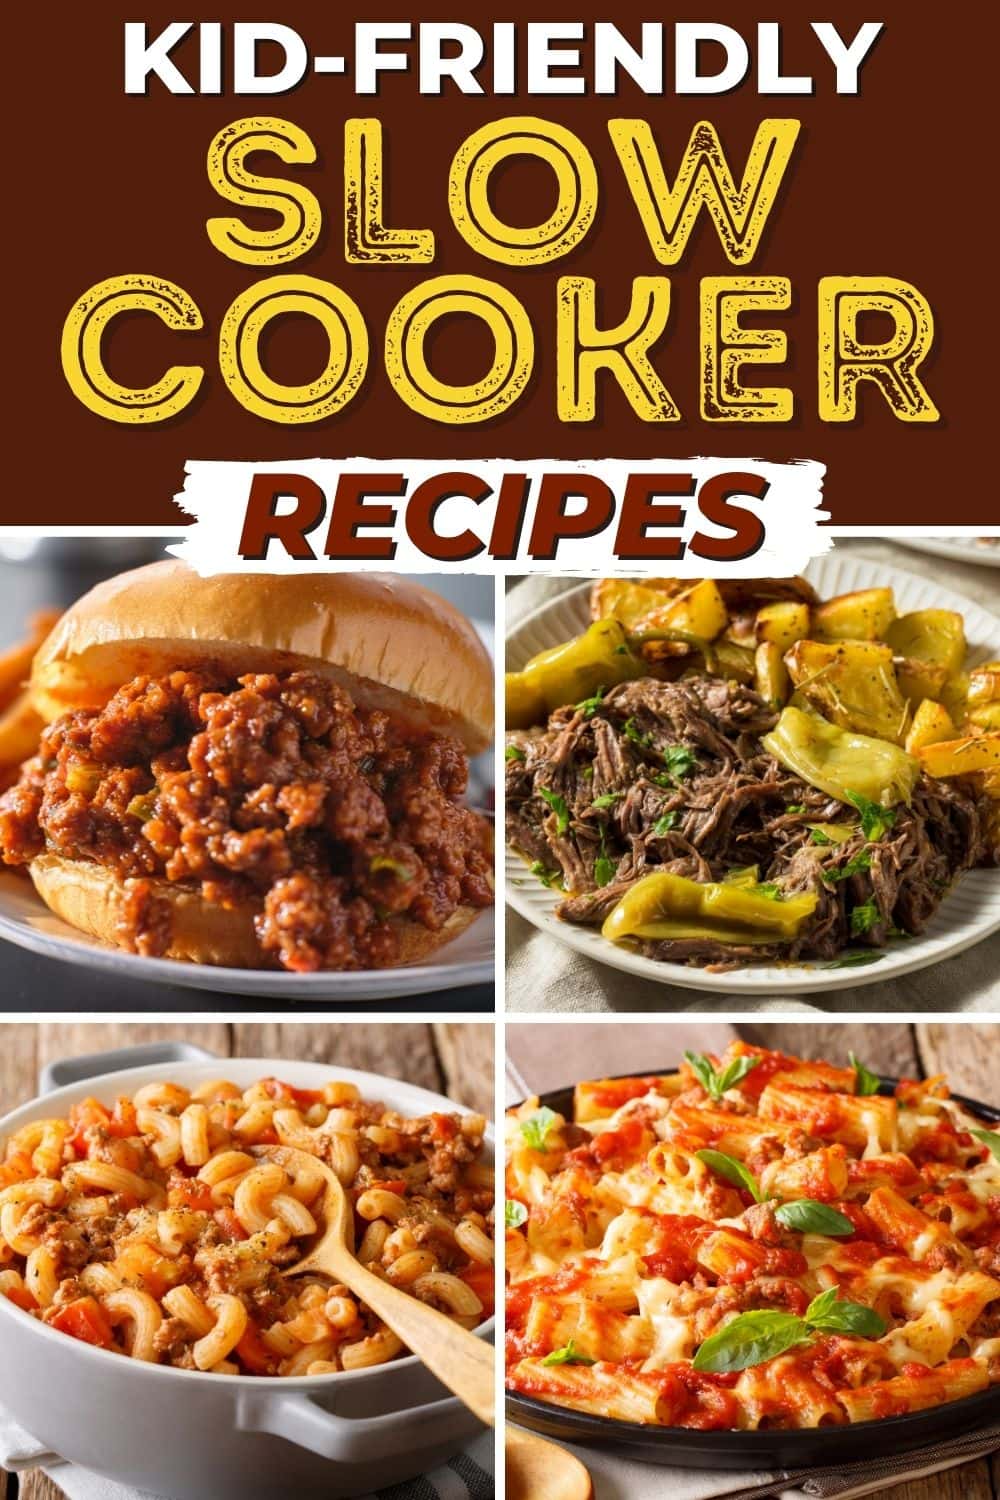 25 Easy Kid-Friendly Slow Cooker Recipes - Insanely Good